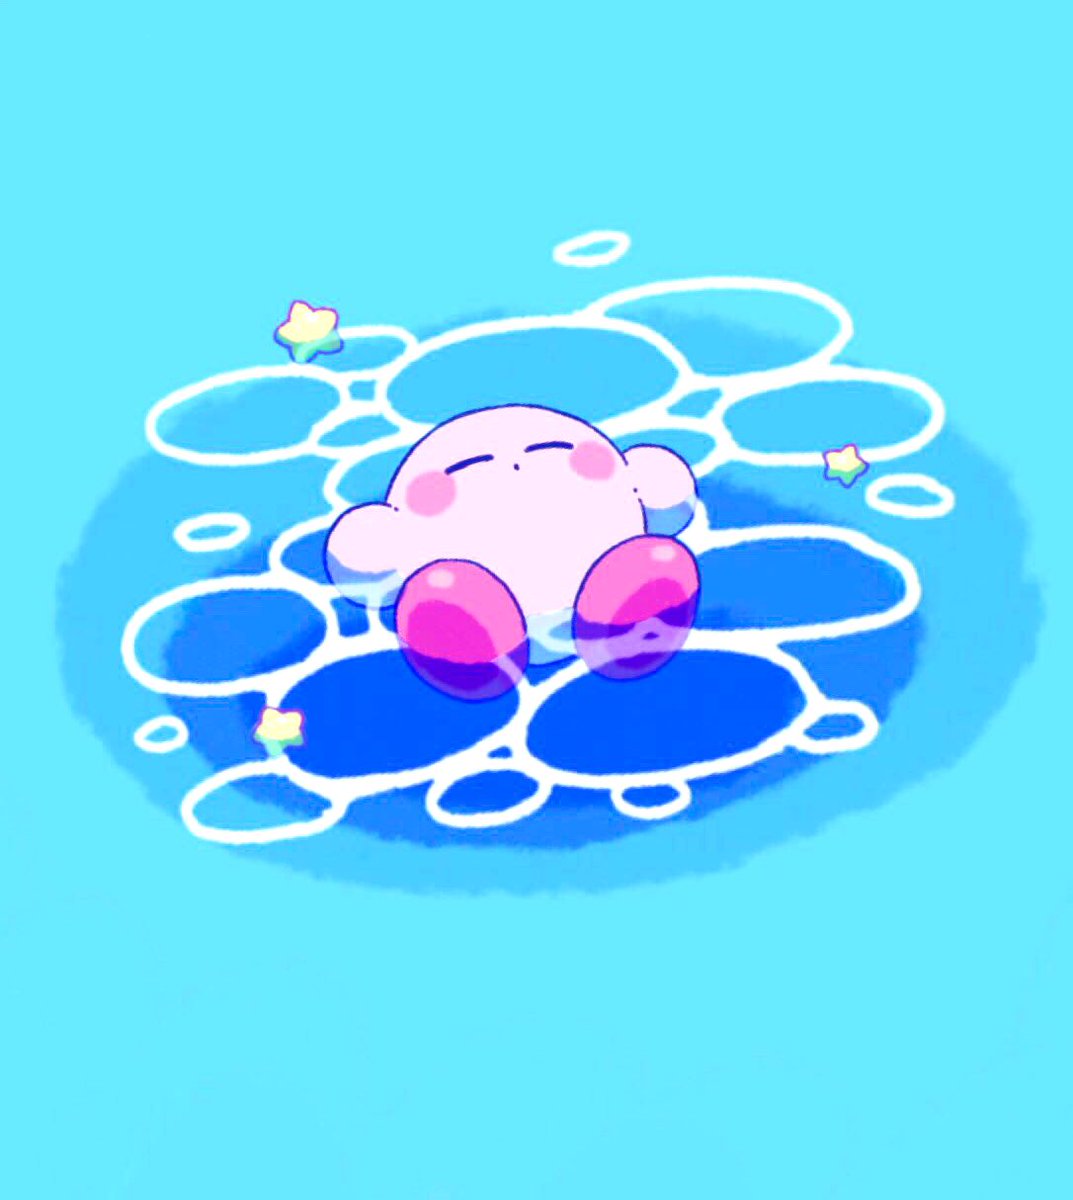 kirby water no humans afloat blue eyes blush stickers looking up rubber duck  illustration images